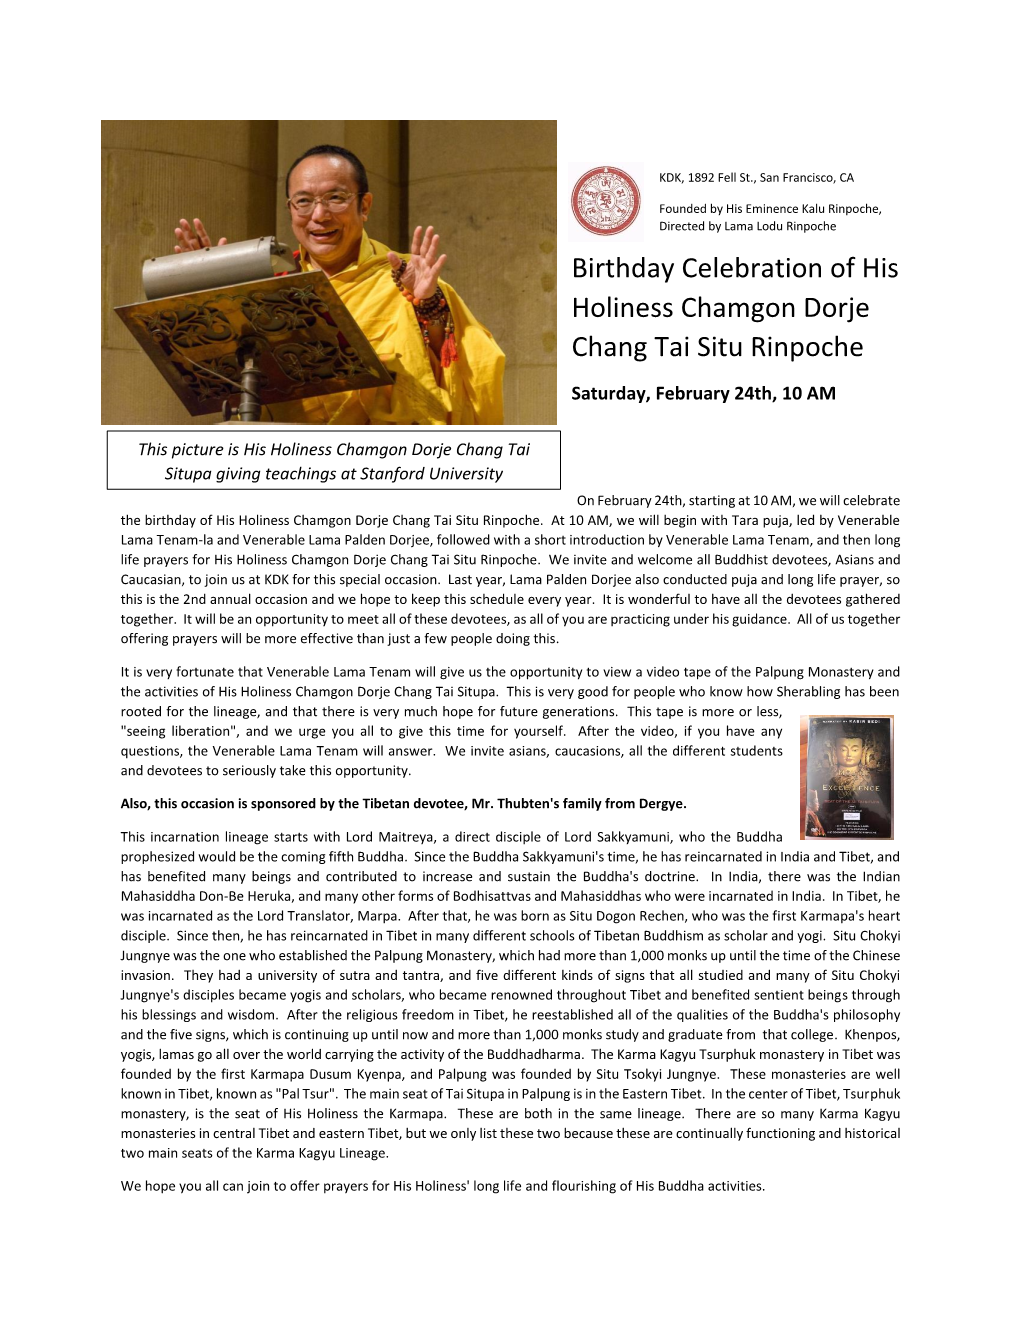 Birthday Celebration of His Holiness Chamgon Dorje Chang Tai Situ Rinpoche